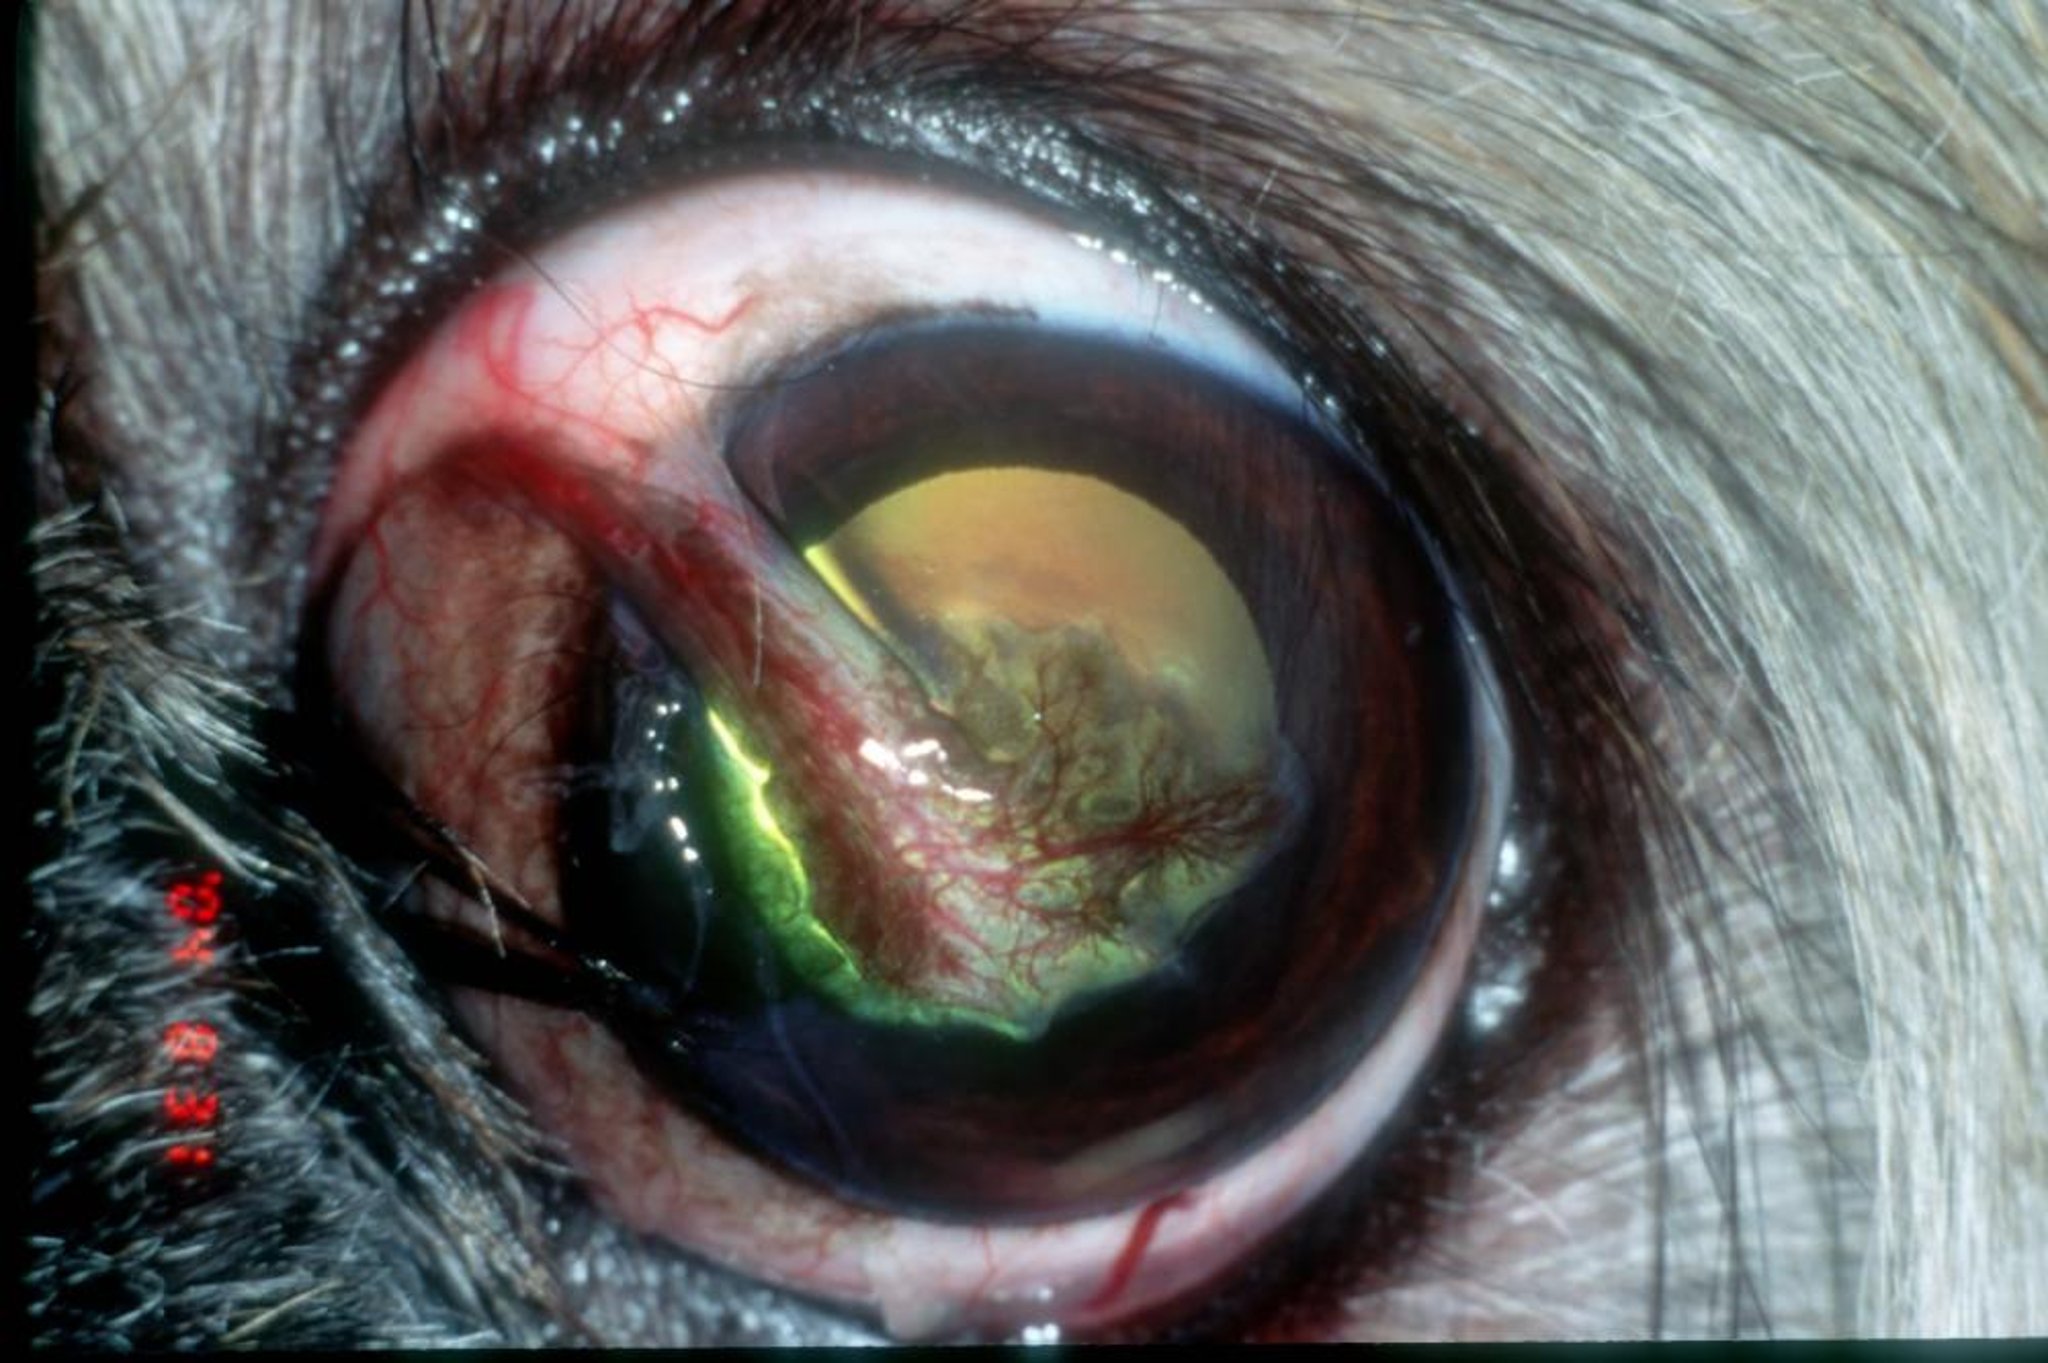 Treatment of deep corneal ulceration with pedicle conjunctival graft, dog